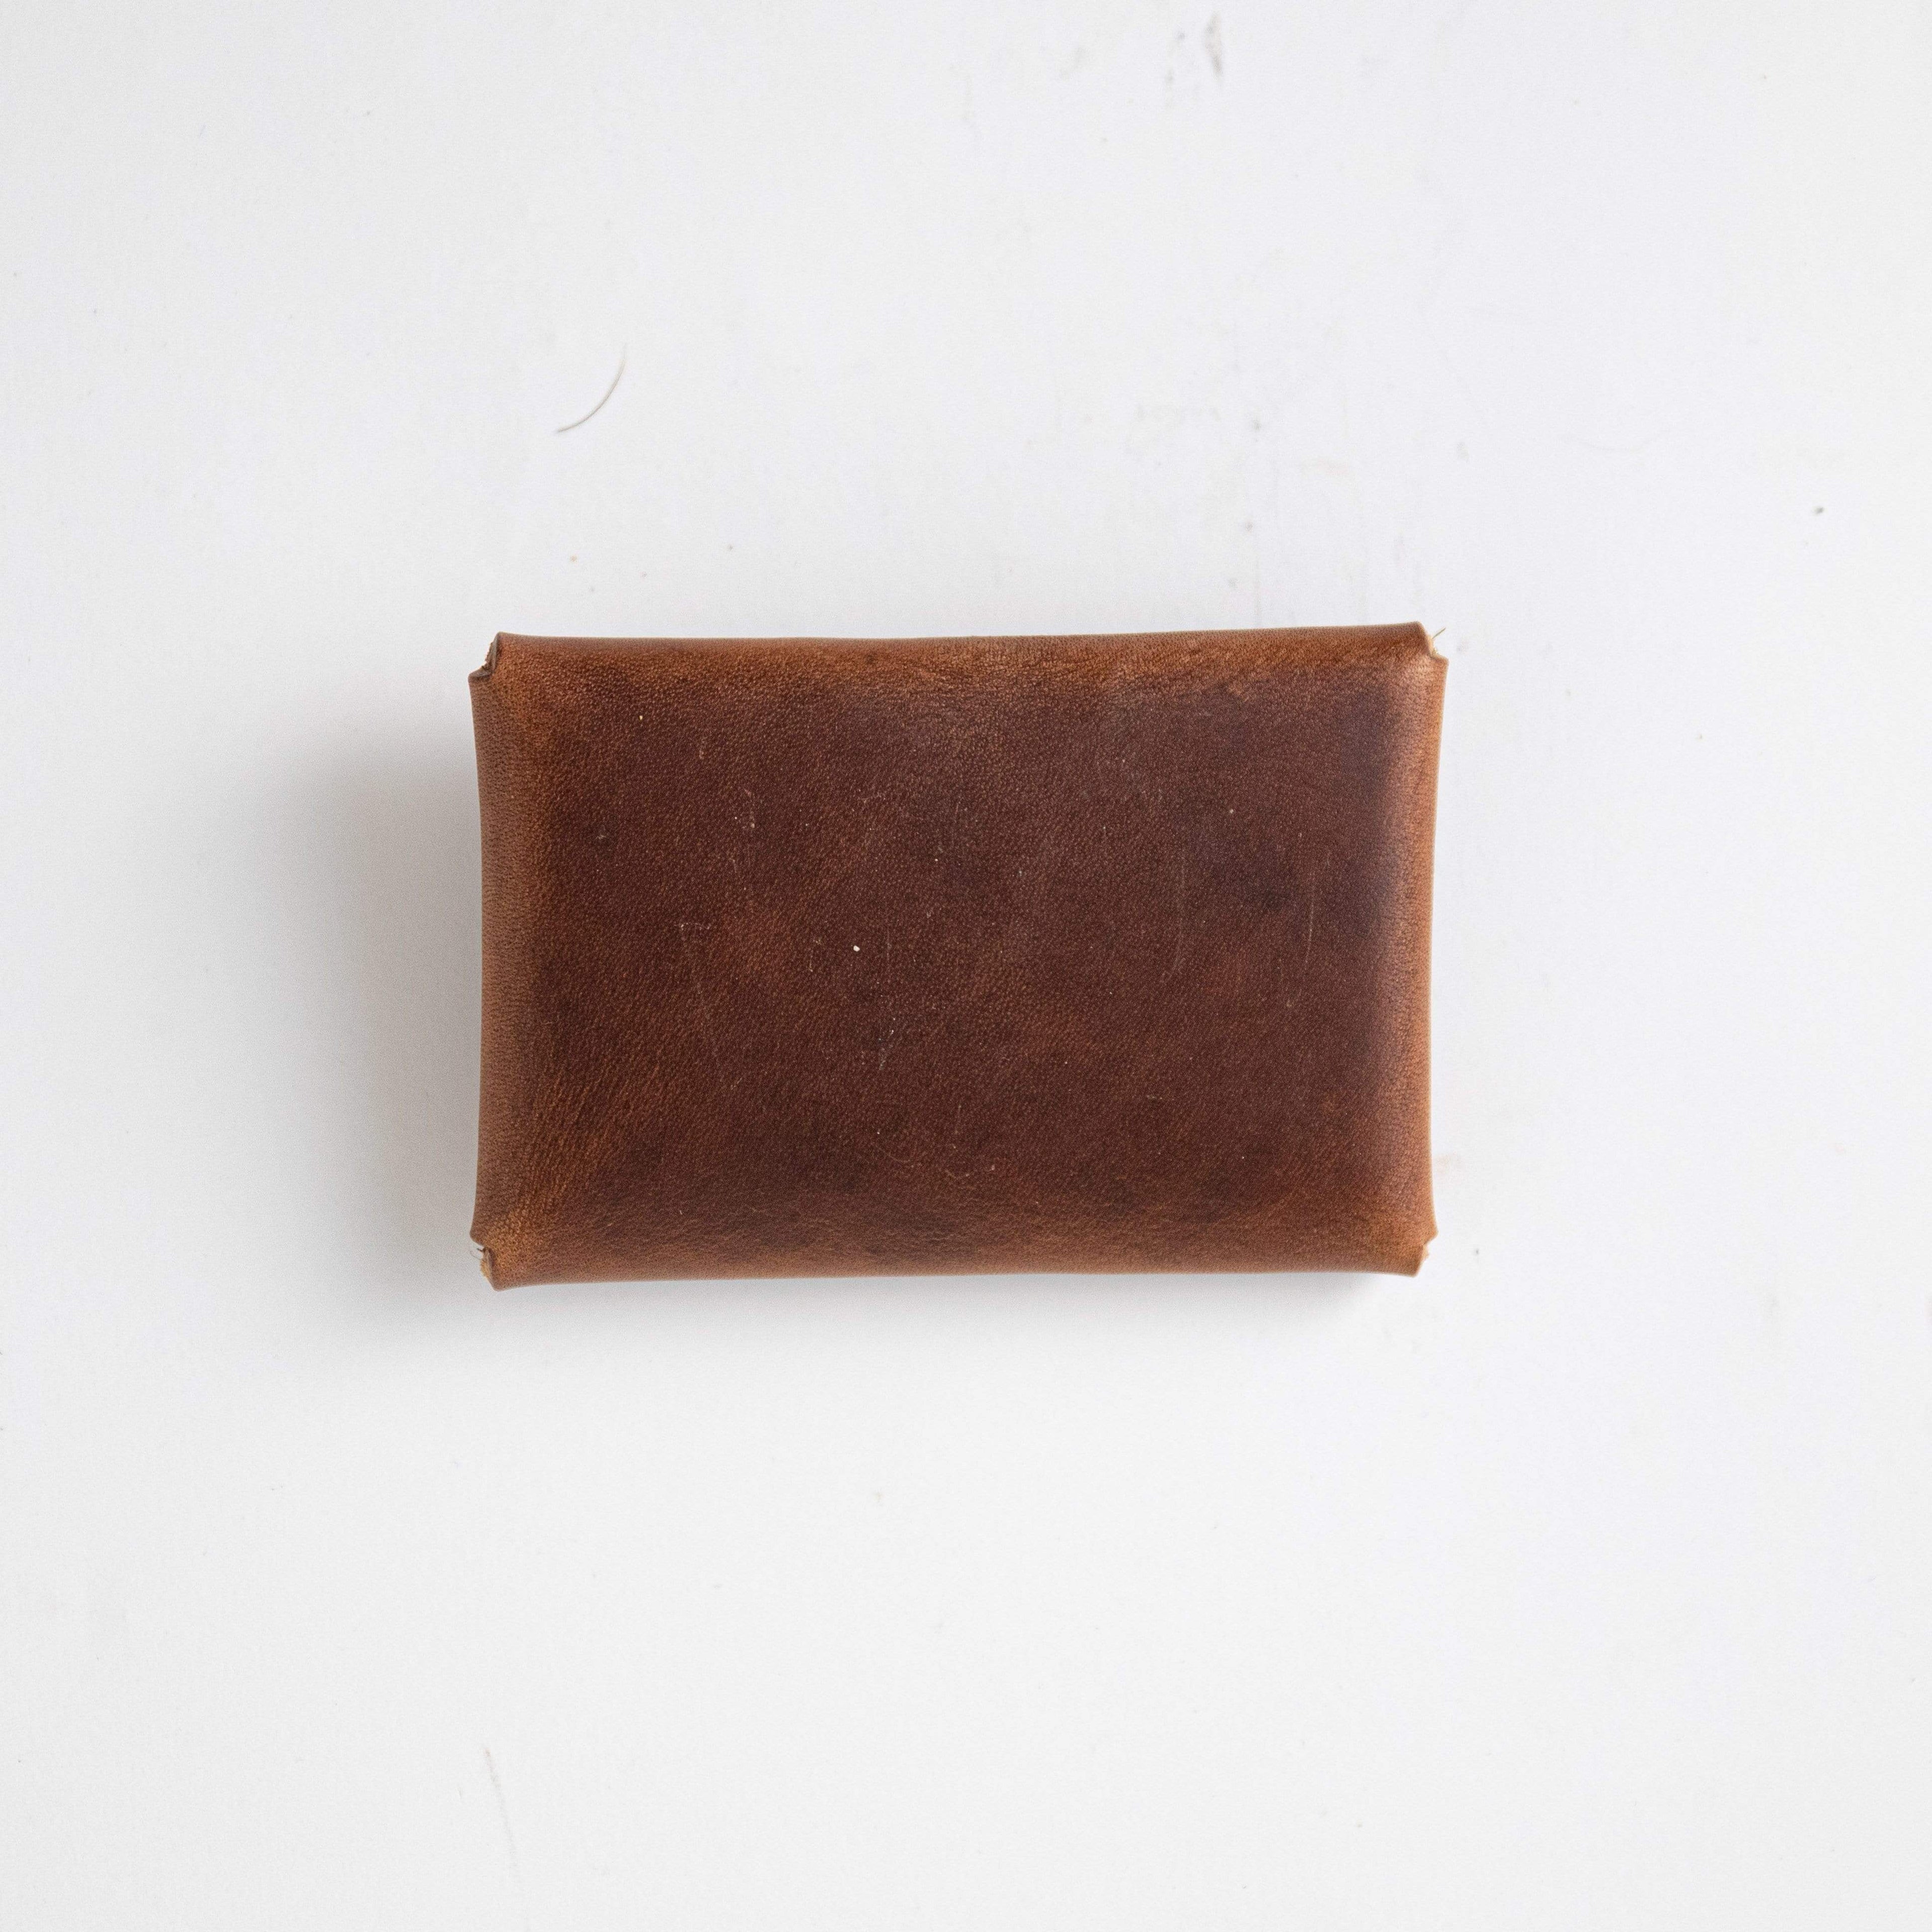 English Tan Card Envelope- card holder wallet - leather wallet made in America at KMM &amp; Co.